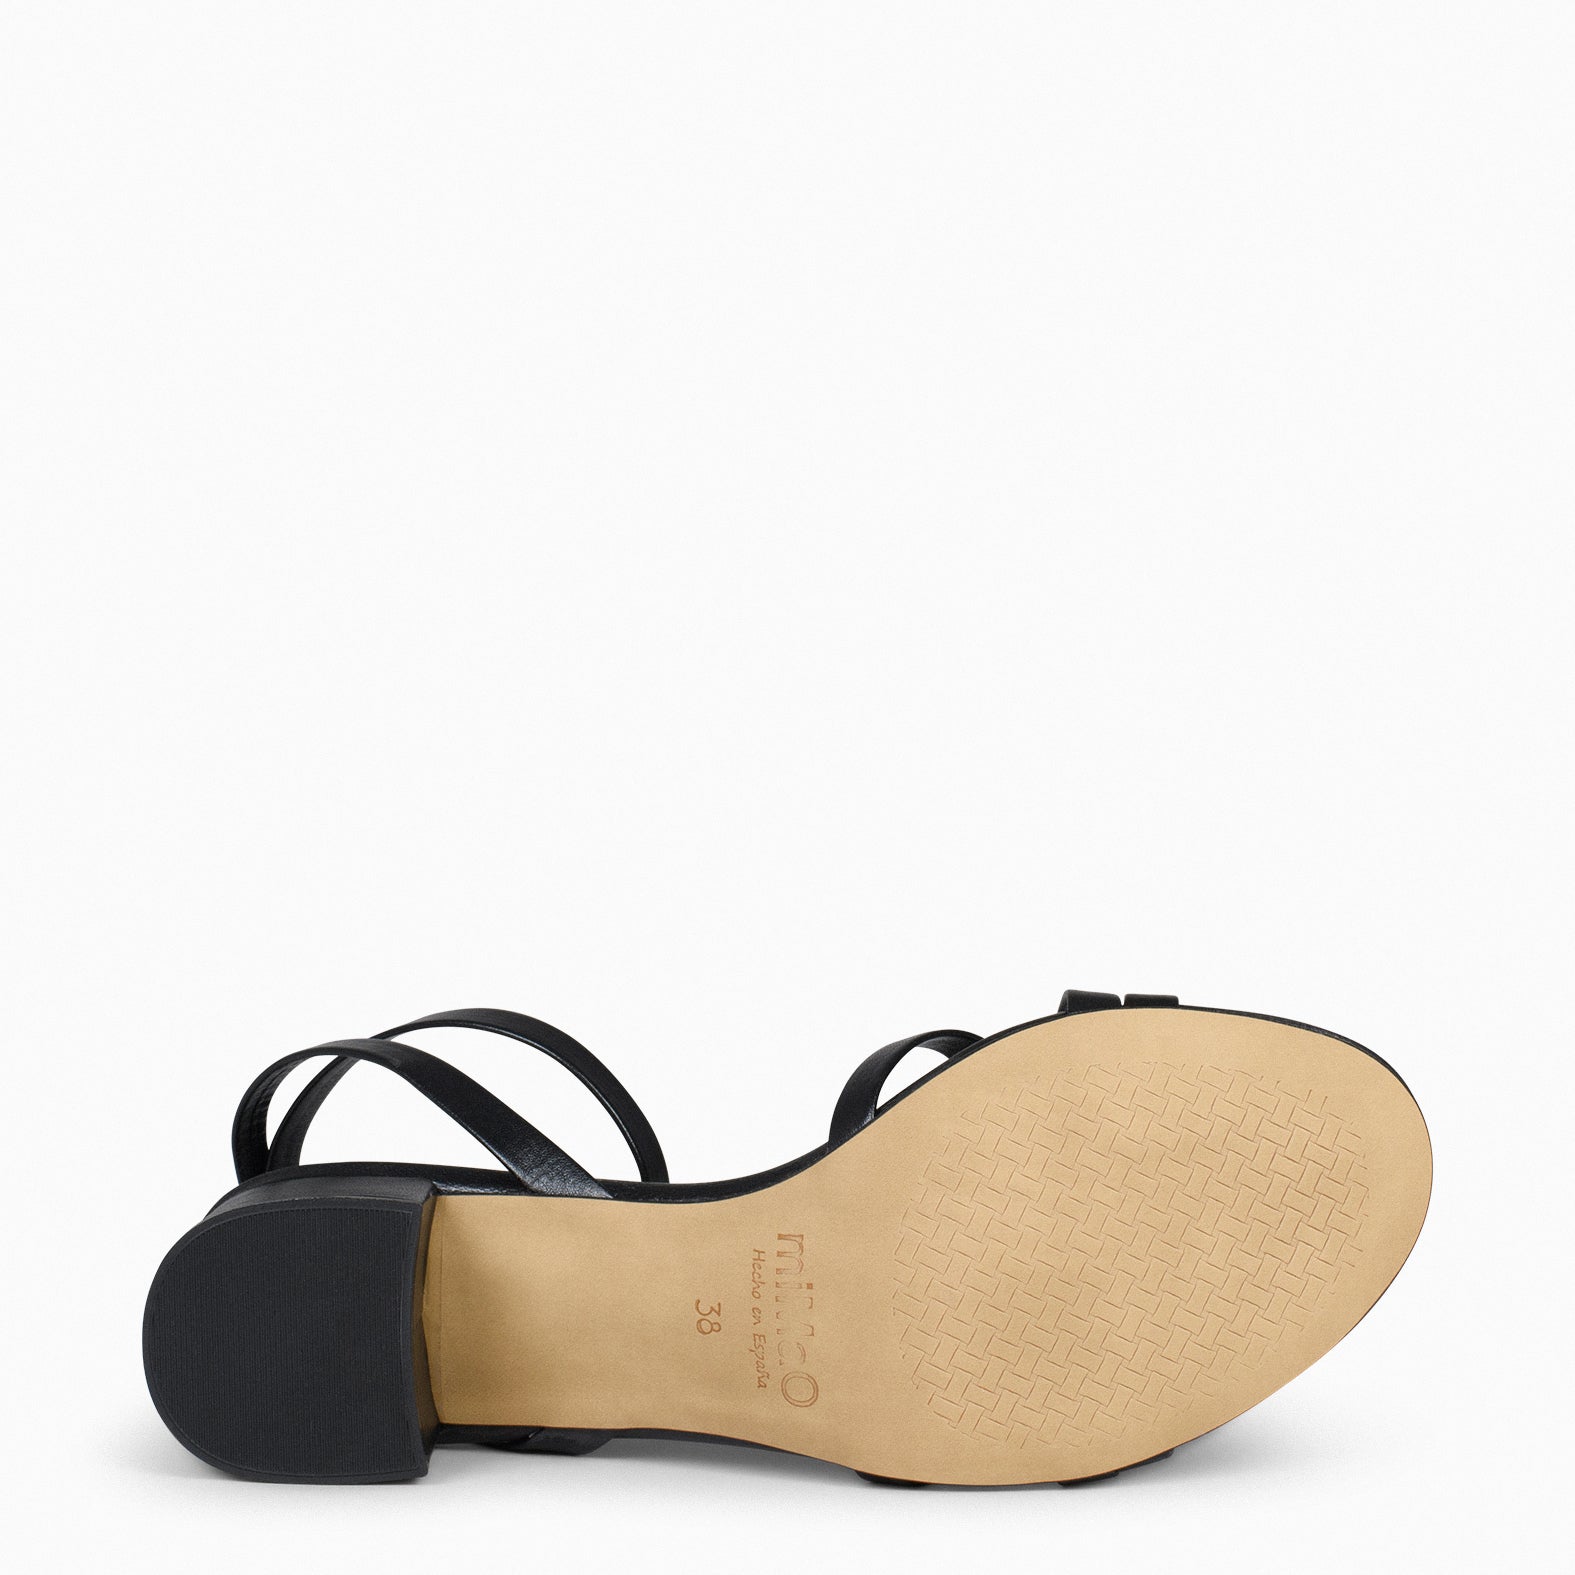 VIENA – BLACK SANDAL WITH THIN STRAPS AND LOW HEEL